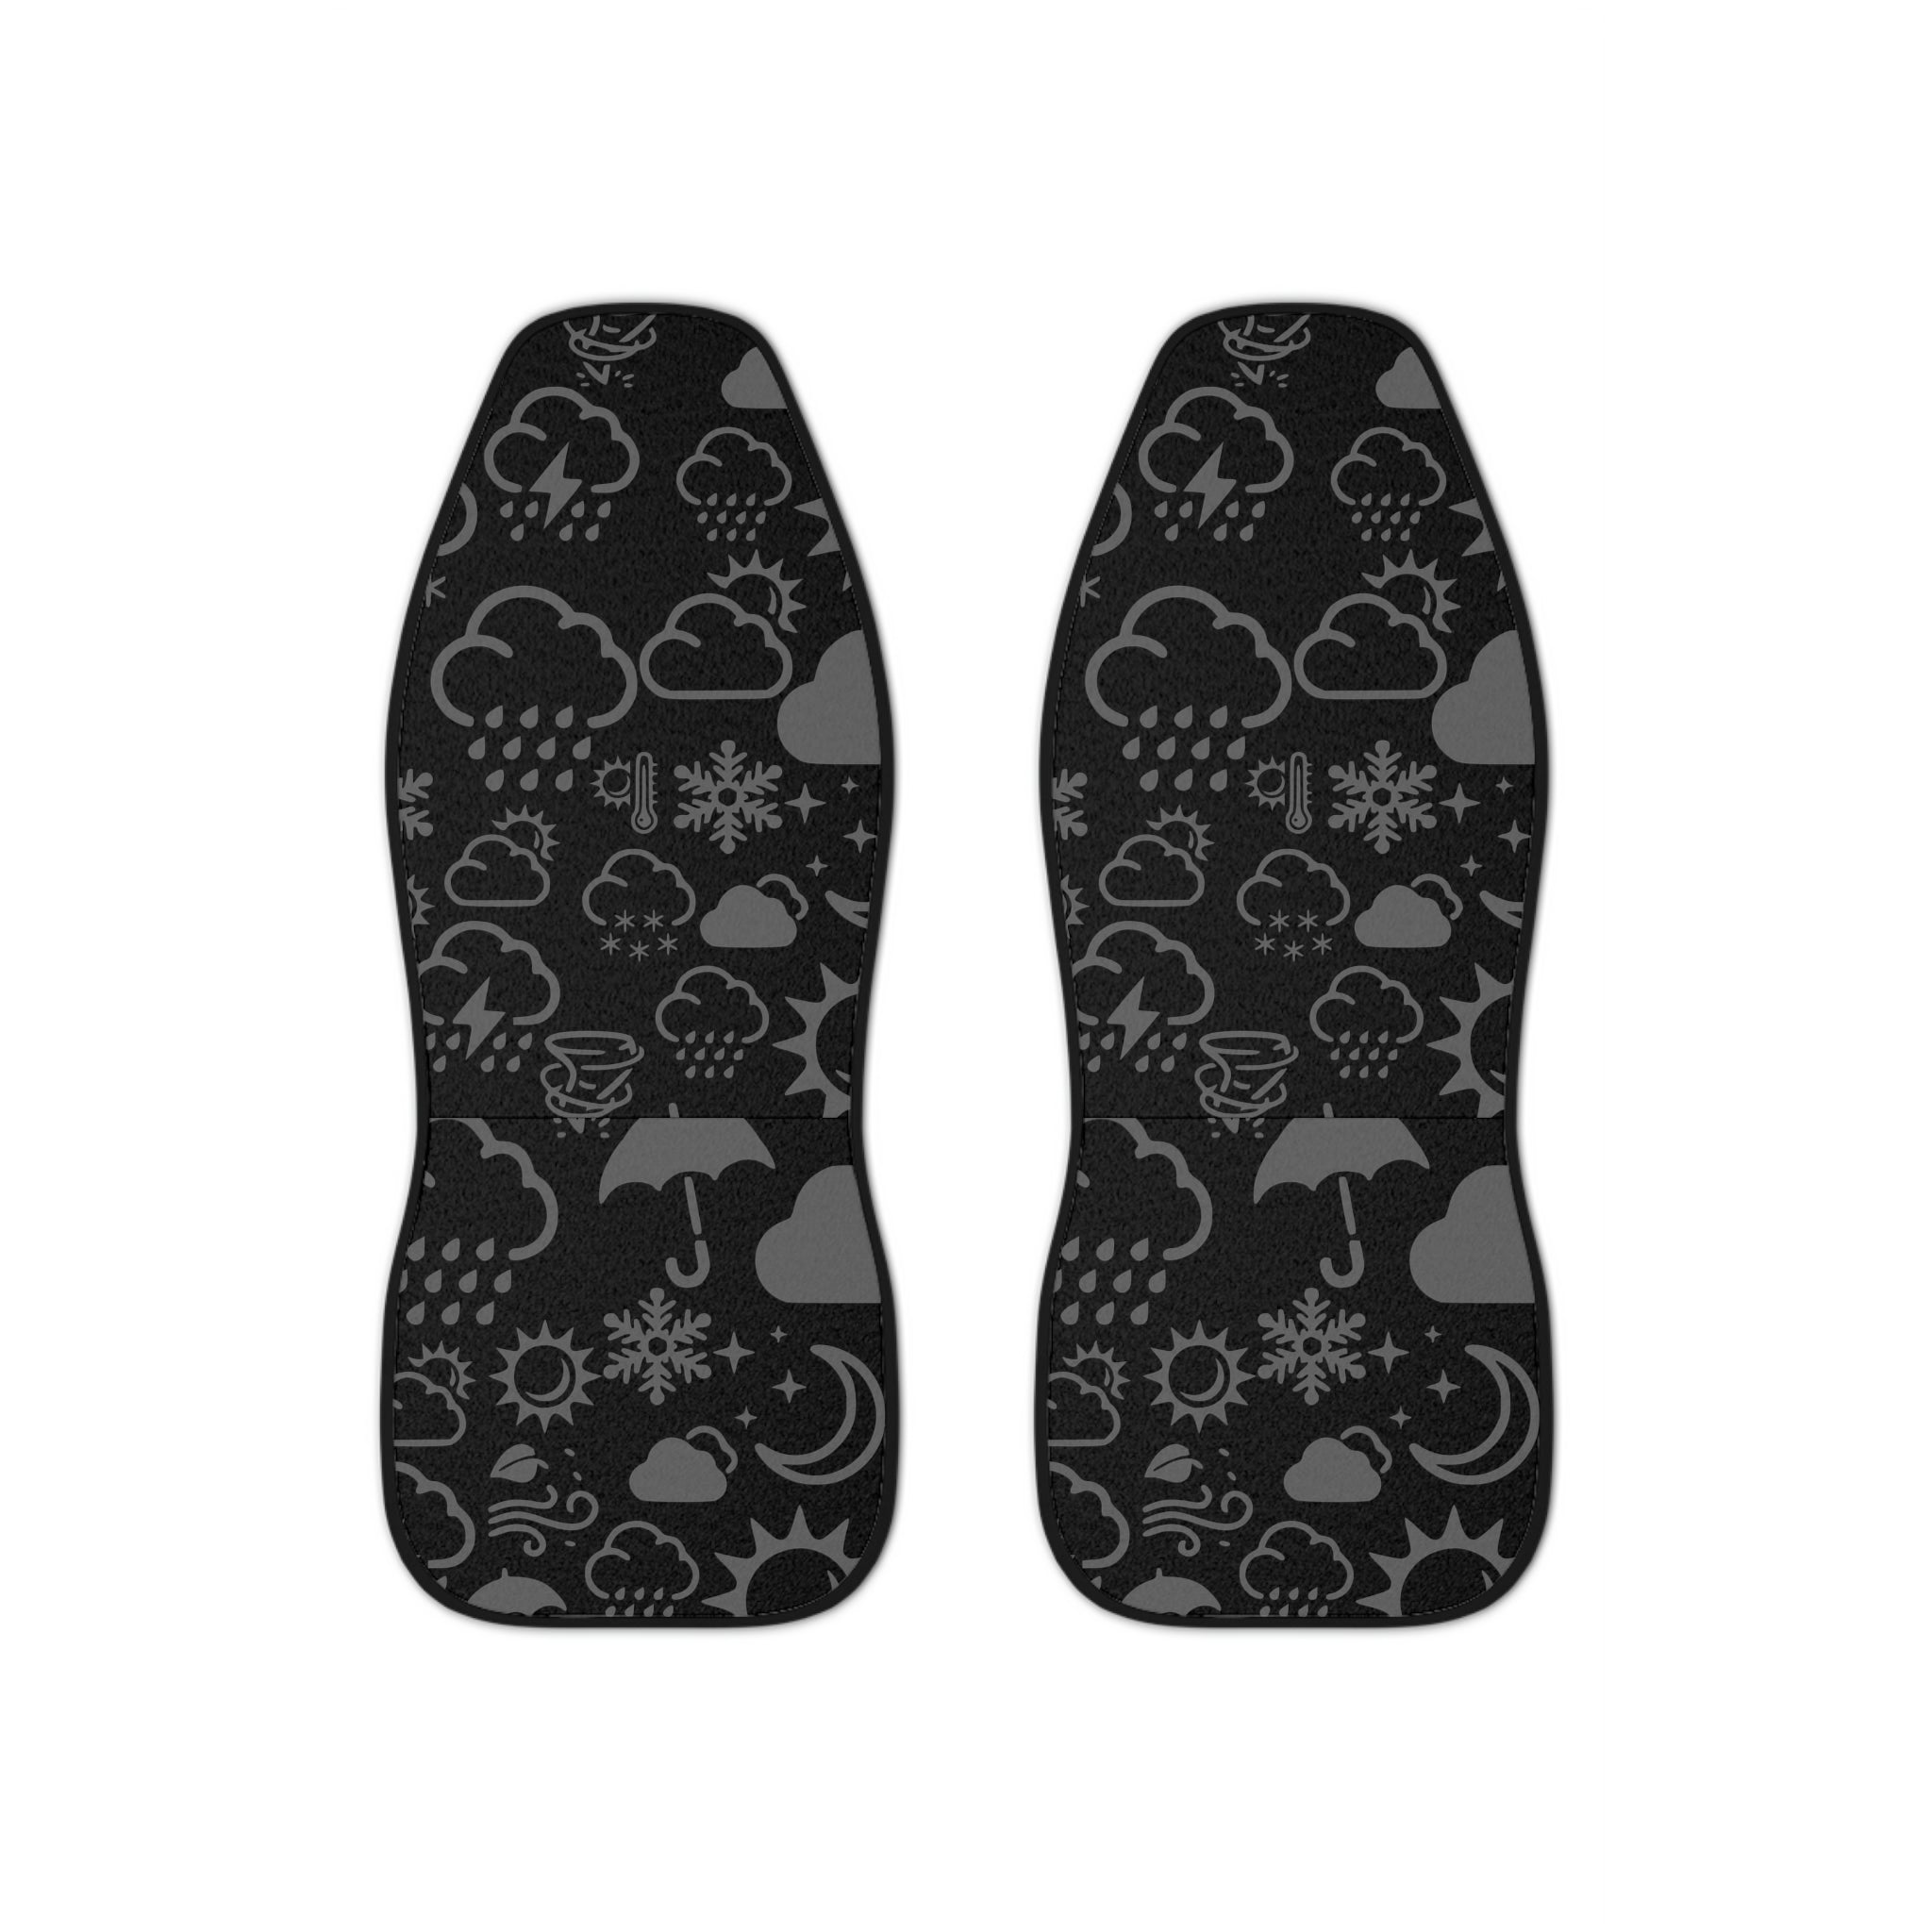 Wx Icon (Black/Gray) Car Seat Covers 